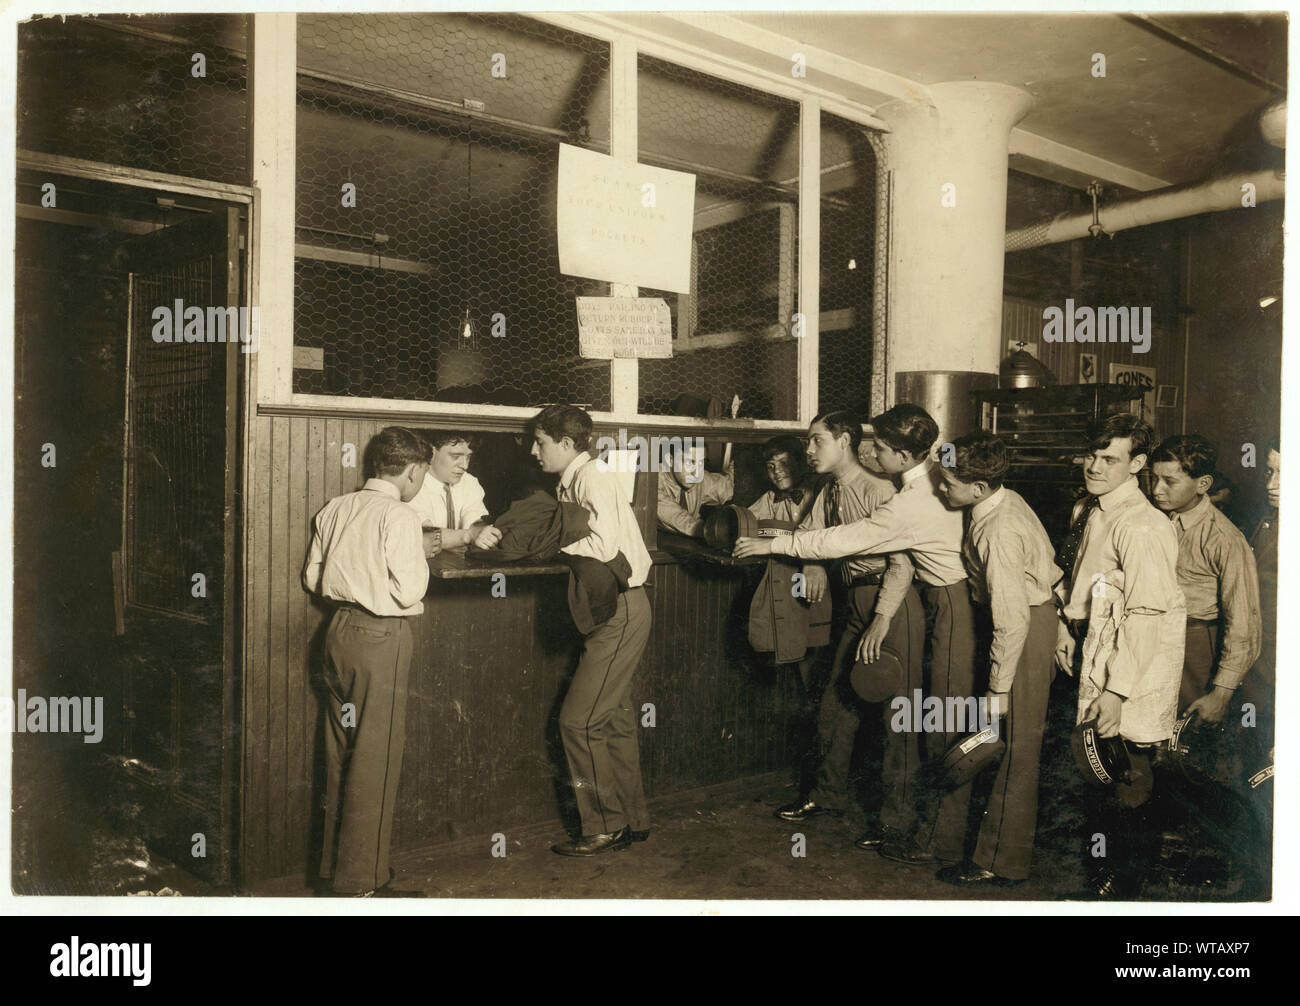 Messengers at the main office, Postal Telegraph Co., 283 B'way, turning in their uniforms at close of the day. The boys are carefully supervised and clothes are well kept.  Photographs from the records of the National Child Labor Committee (U.S.) Stock Photo